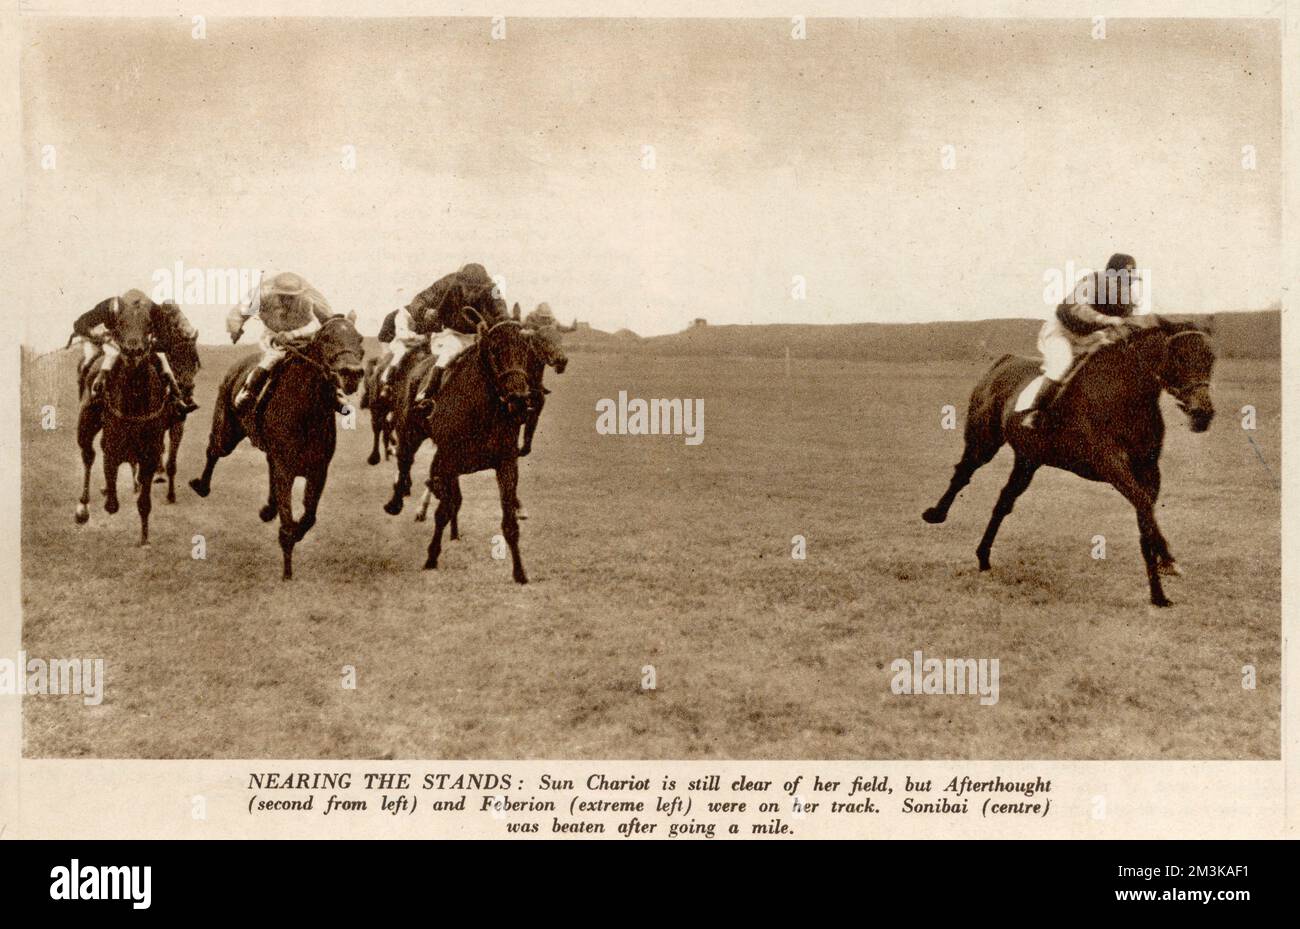 Horse racing at Newmarket during World War II. Nearing the stands, Sun Chariot is still clear of her field but Afterthought (second from left) and Feberion (extreme left) were on her track.  Sonibai (centre) was beaten after going a mile.    1942 Stock Photo